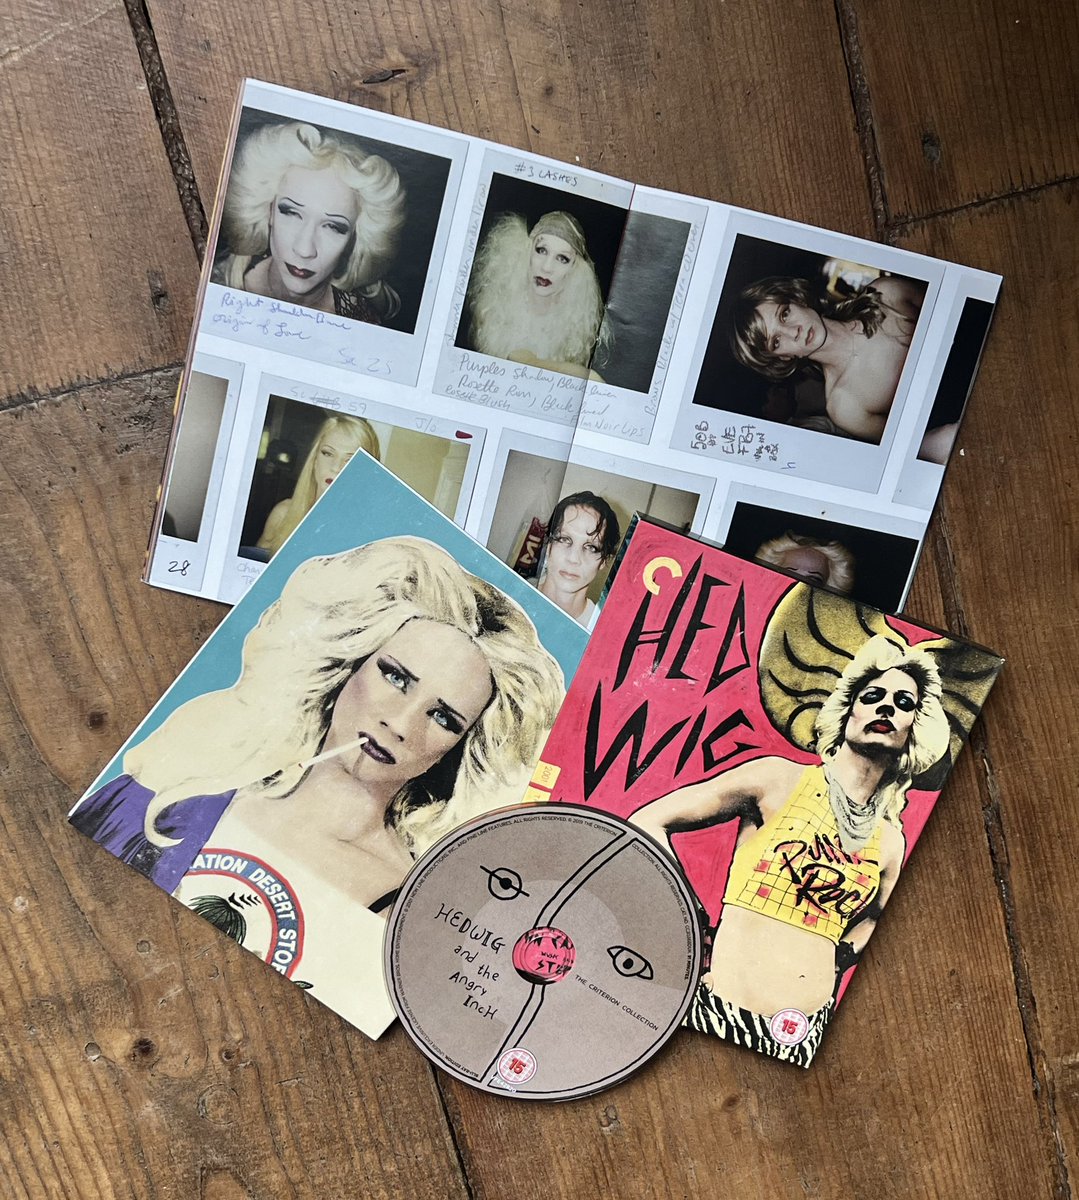 Held in the grip of a vile cold *cough hack* barely left the sofa. Time to bring this beauty out again. #Hedwig - the rock musical opus @UKCriterion